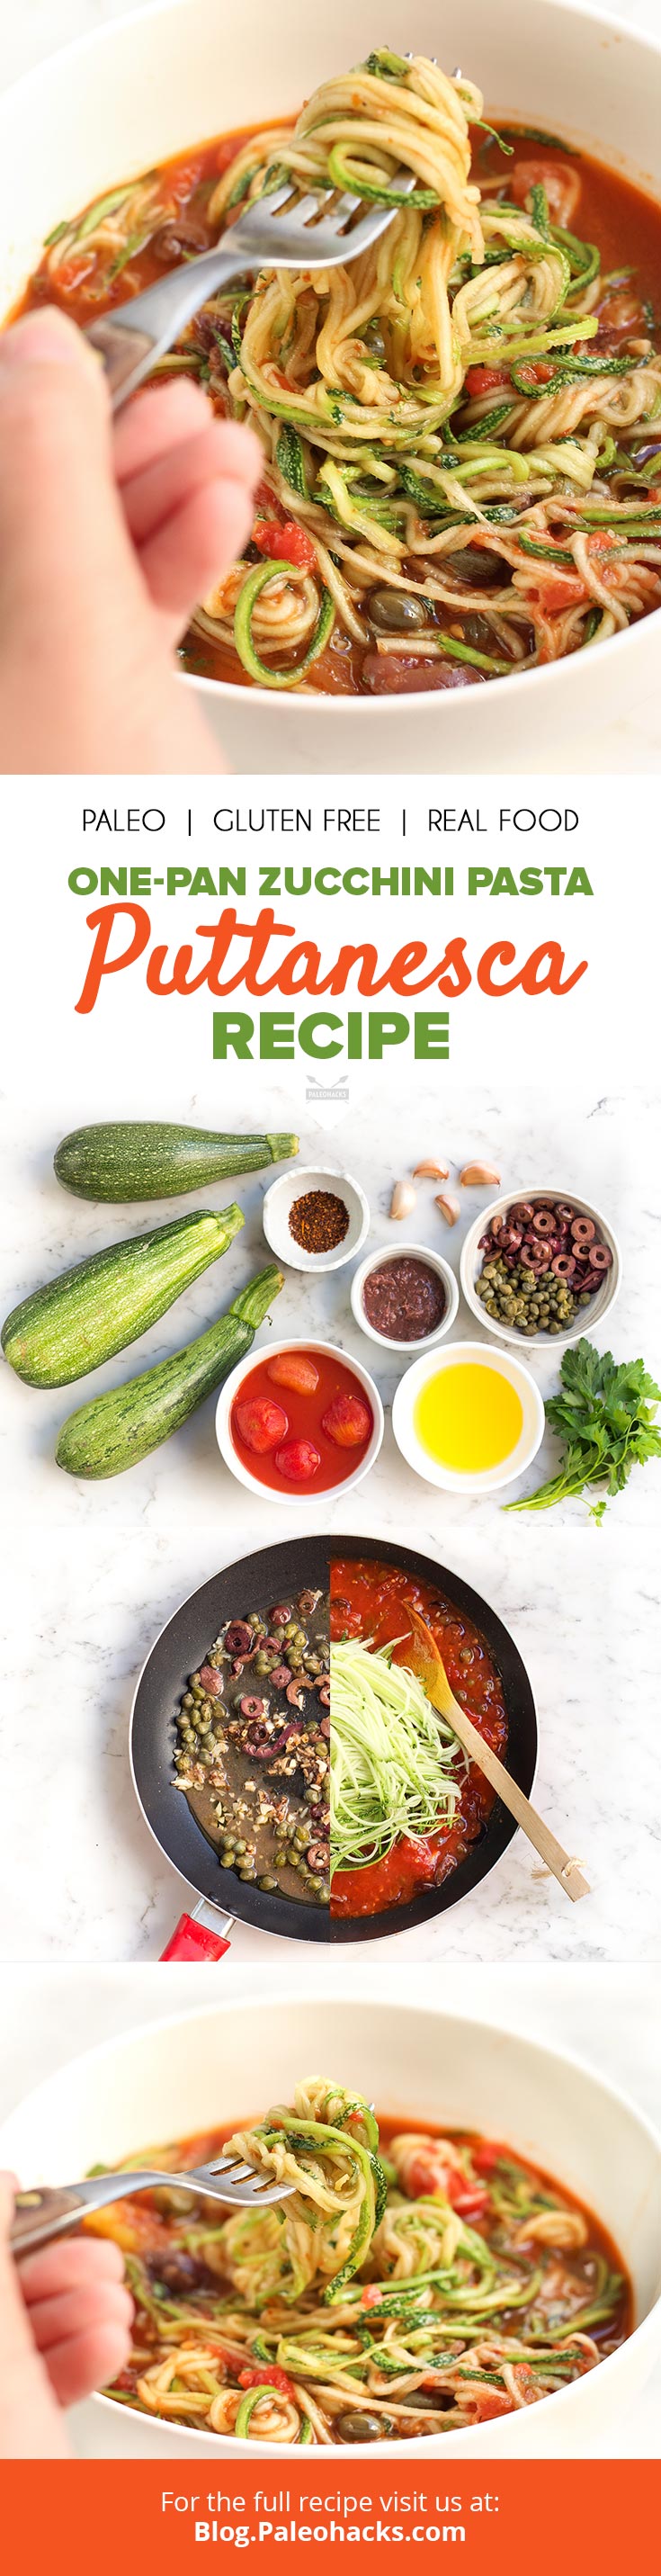 Made with anchovies, capers, garlic, and black olives simmered in a rich tomato sauce, this Zucchini Pasta Puttanesca packs lots of bold flavors!